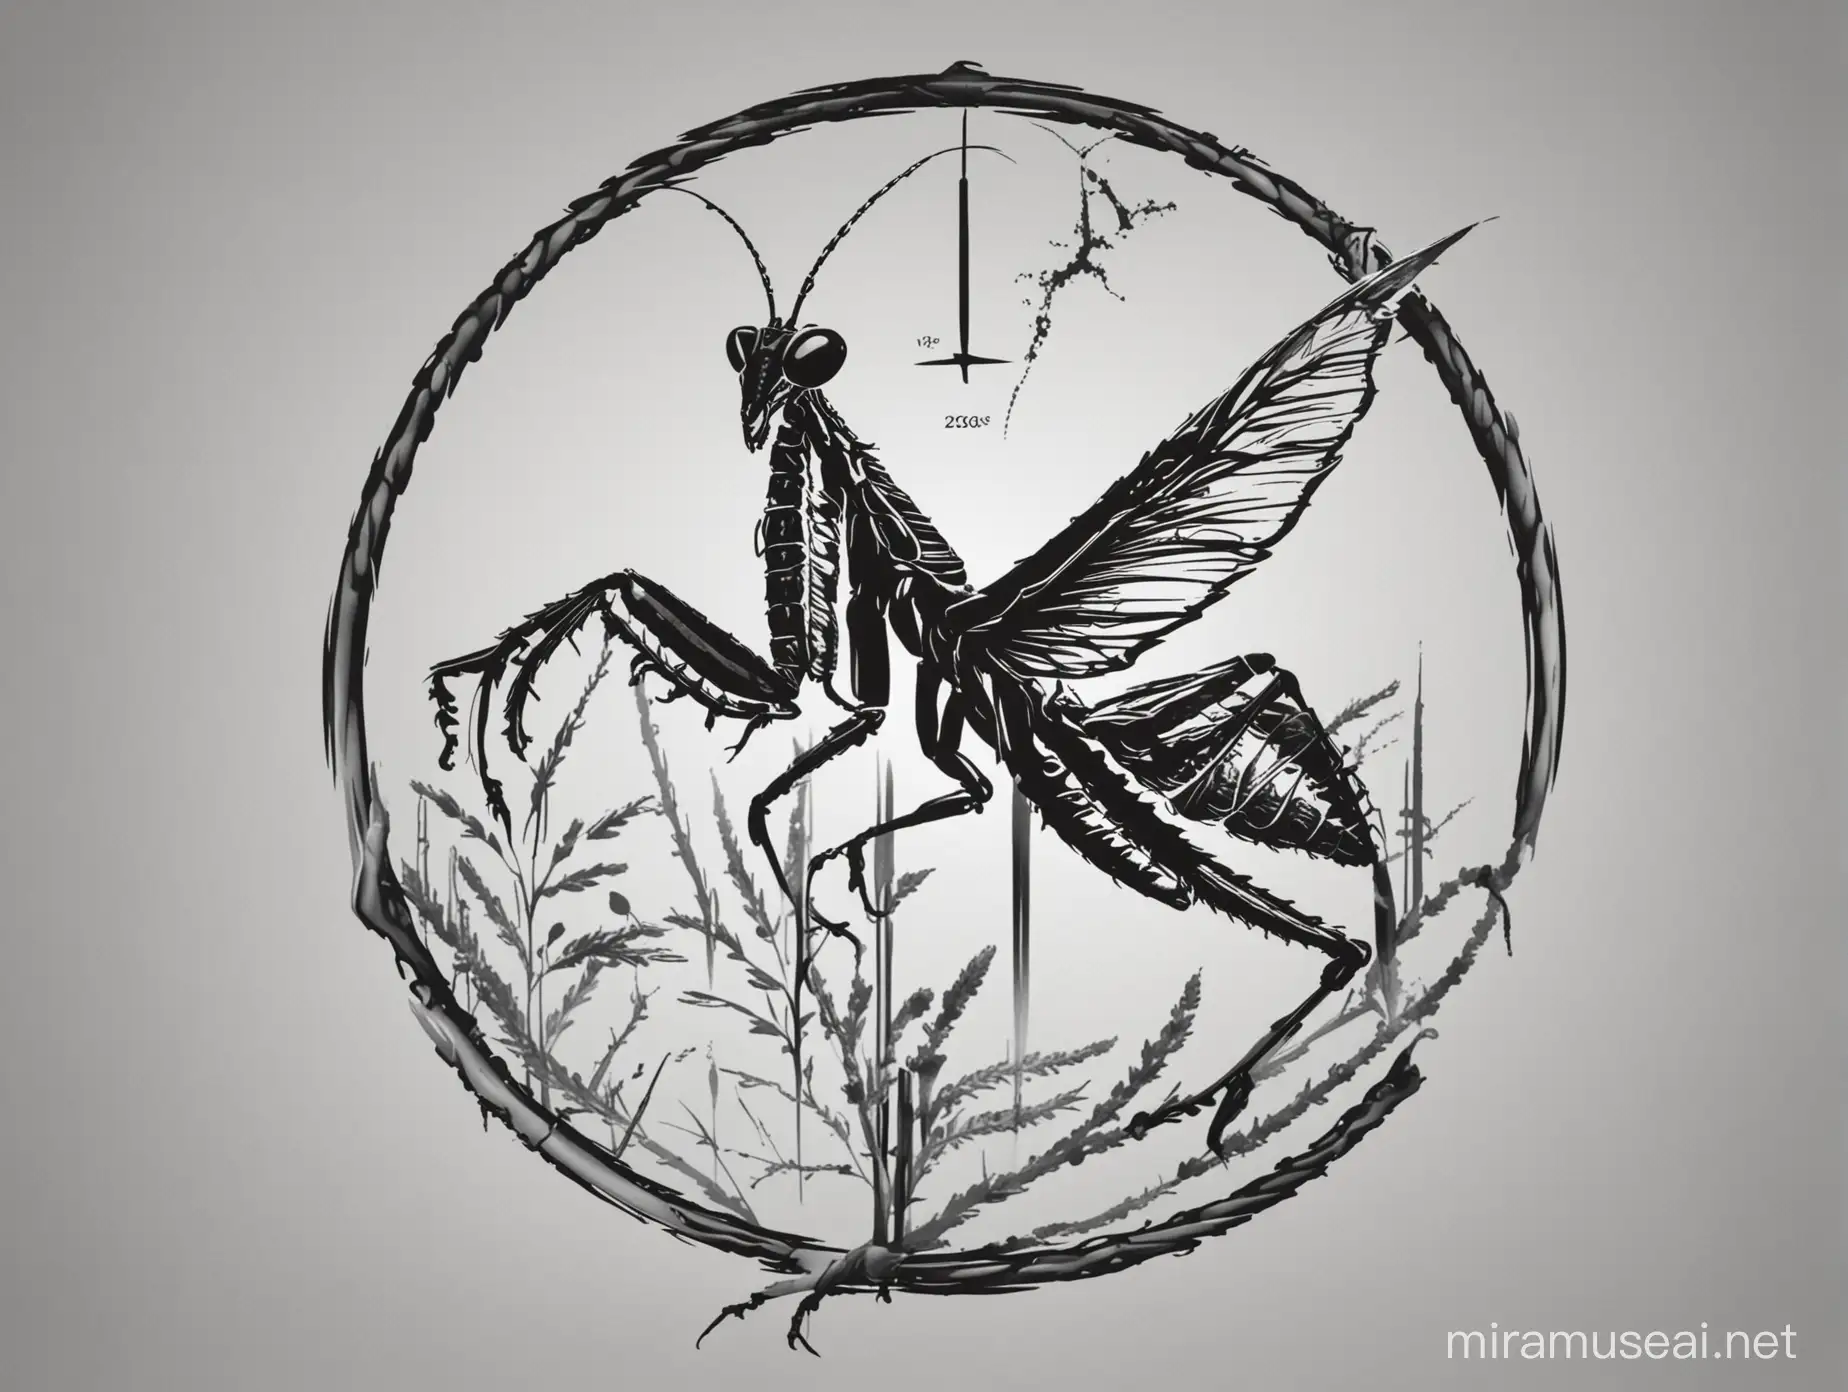 A black and white scientific logo with a praying mantis as a symbol